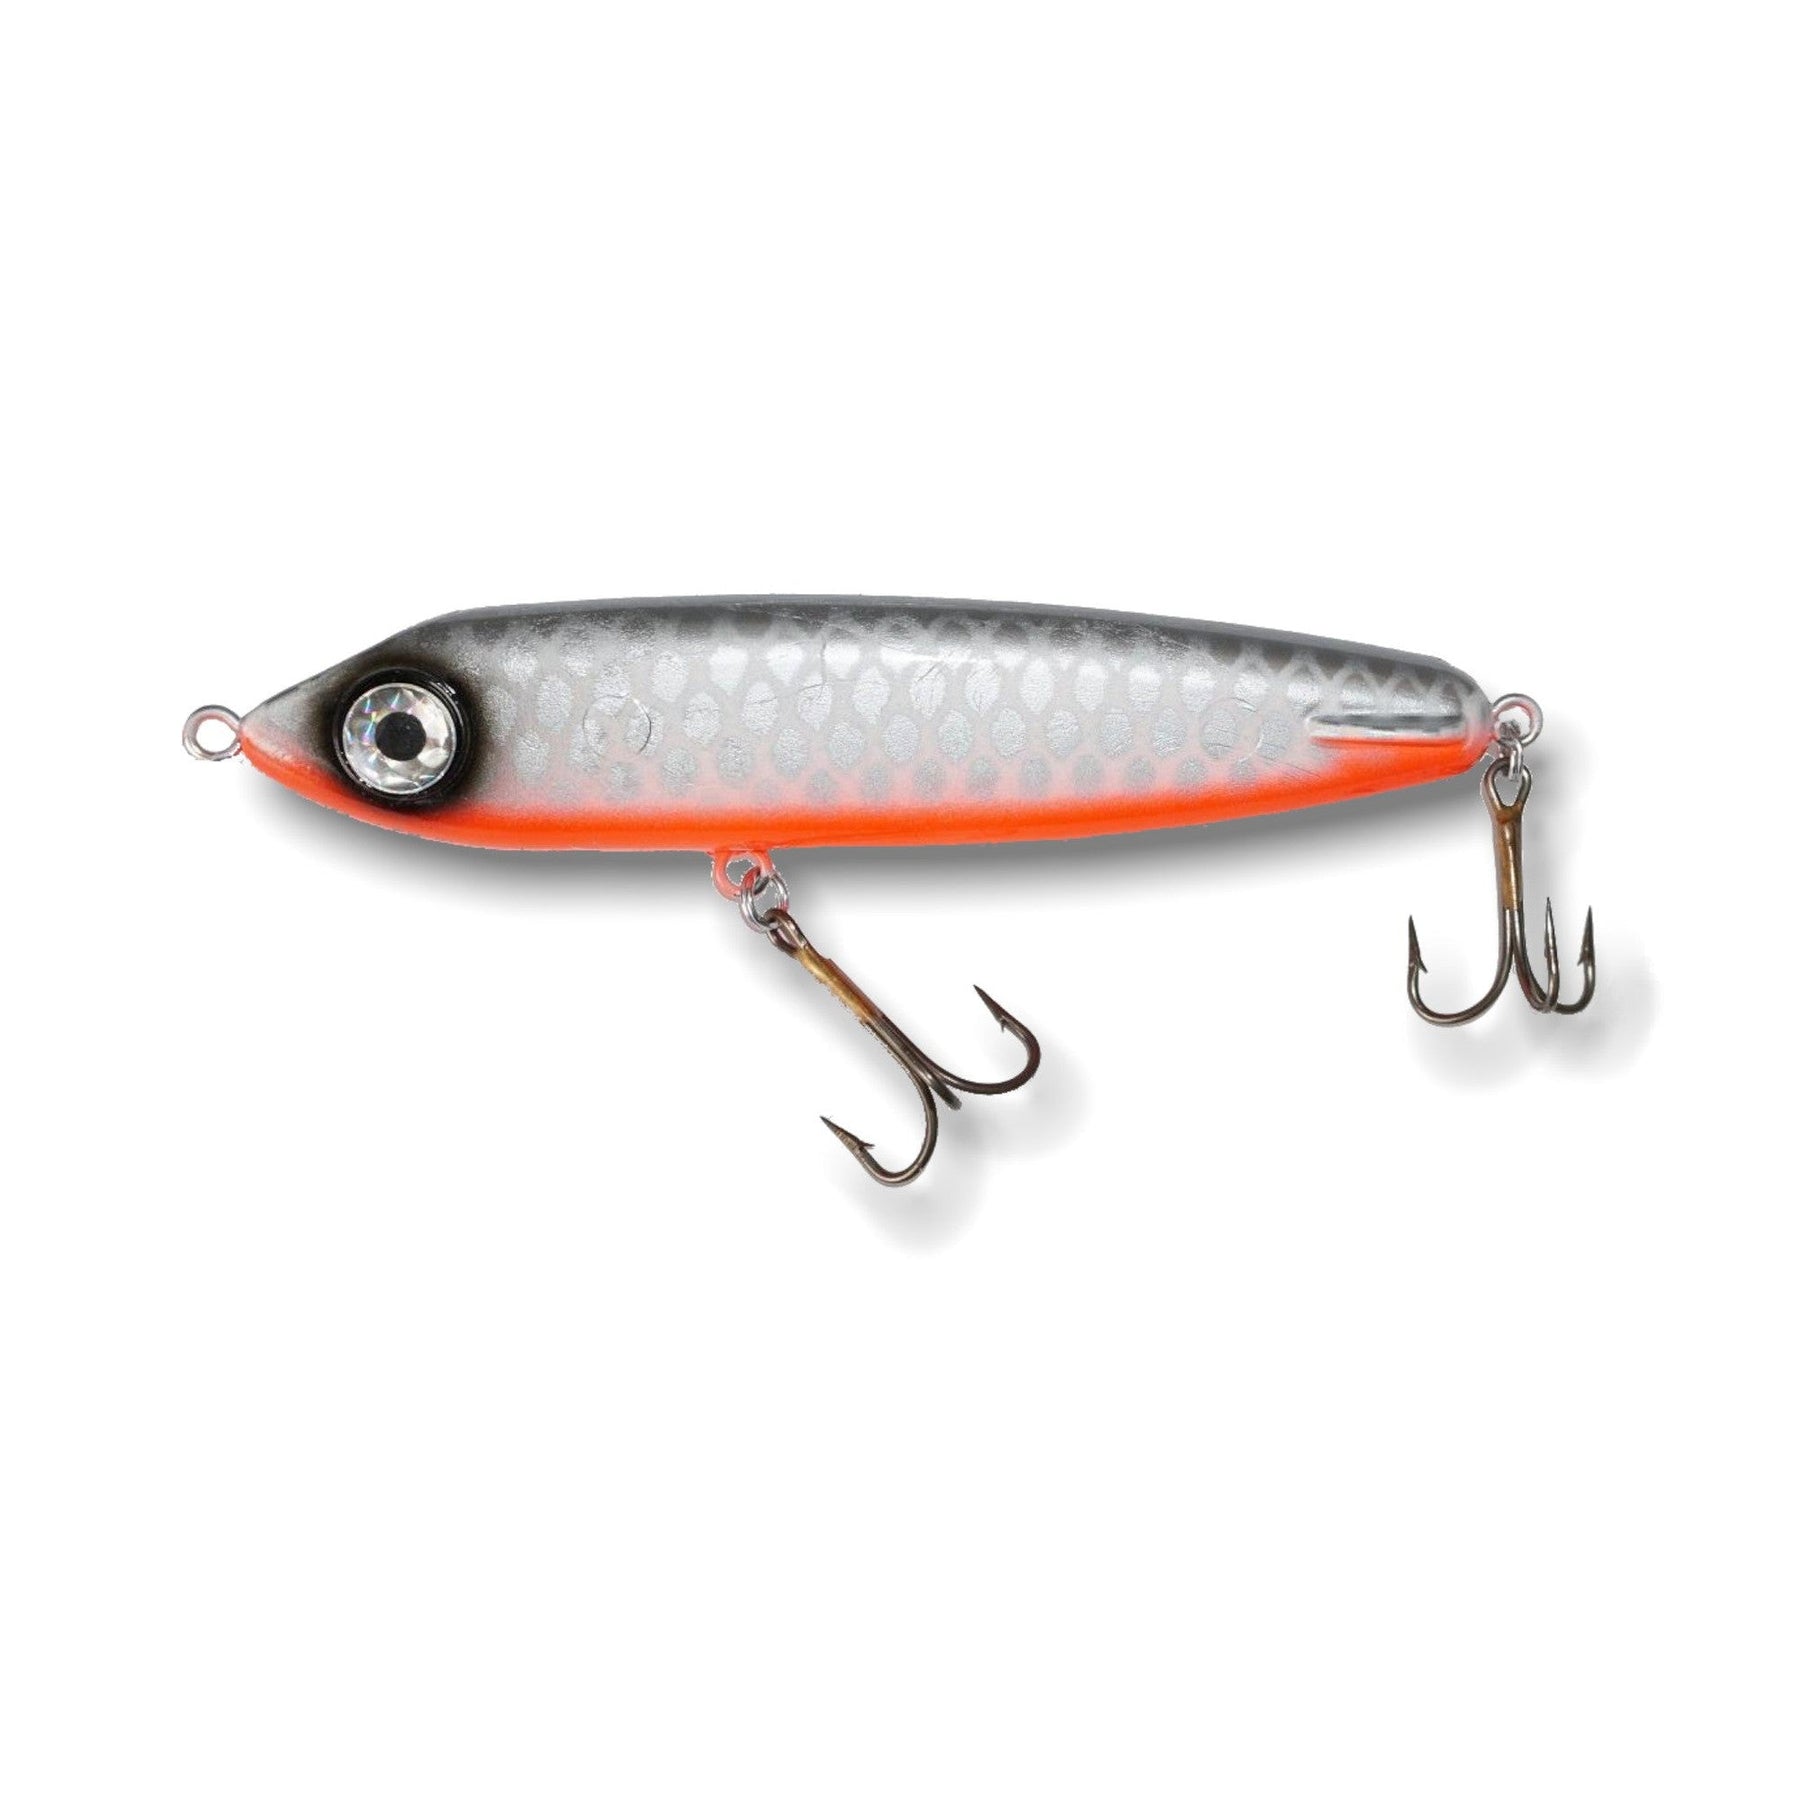 View of Jerk-Glide_Baits ERC Hell Hound 8'' Glide Bait Hot White Fish available at EZOKO Pike and Musky Shop